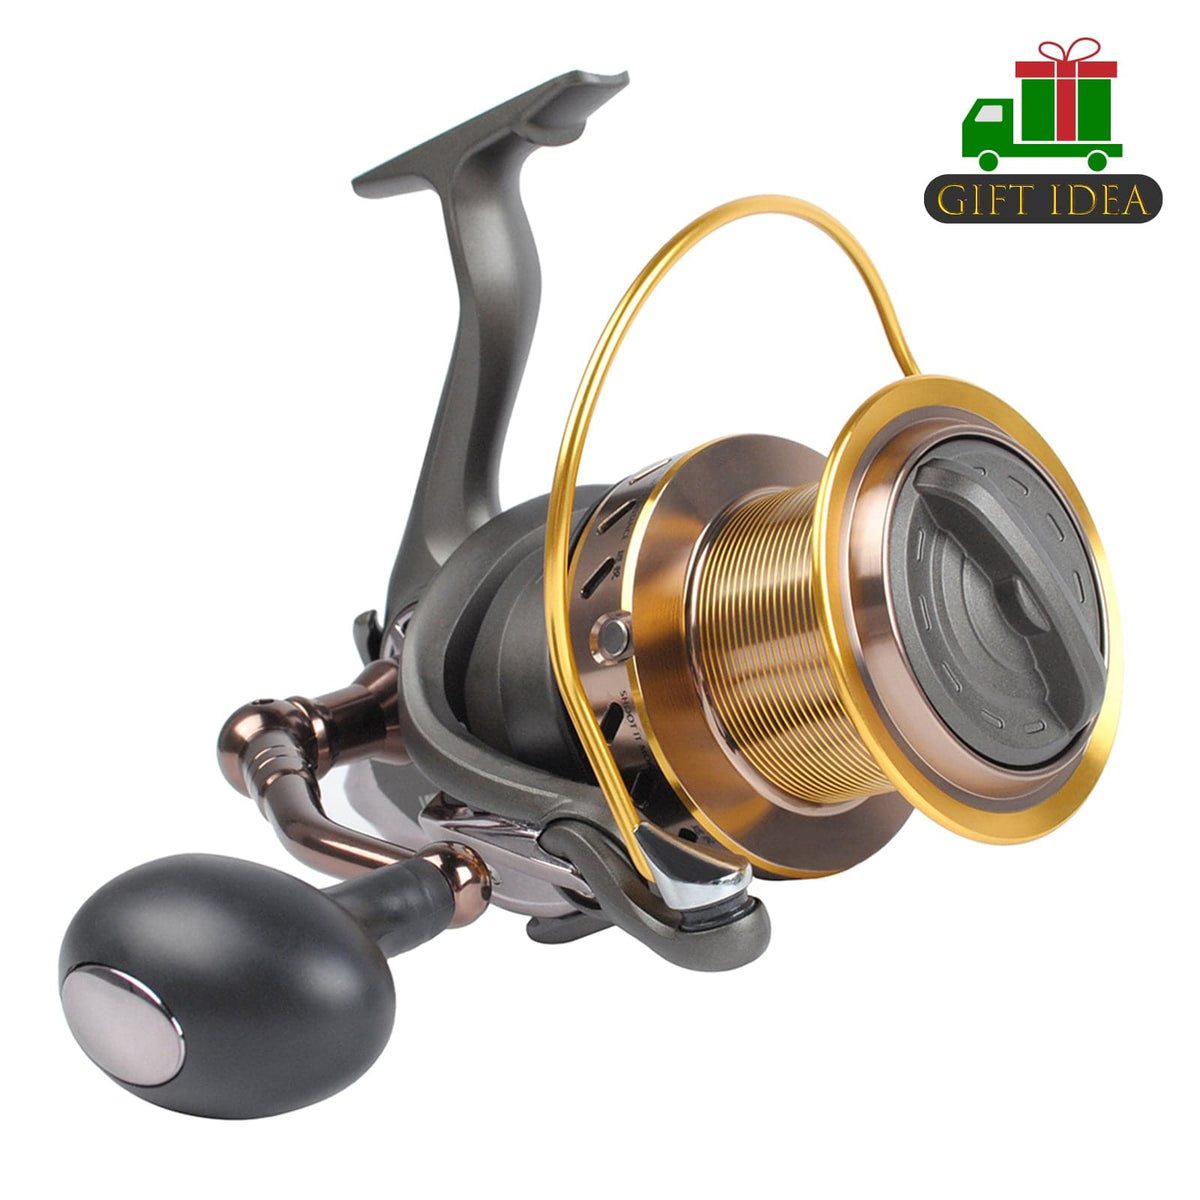 The Best Surf Fishing Spinning Reel 10000/12000 Heavy Duty - Dr.Fish – Dr. Fish Tackles